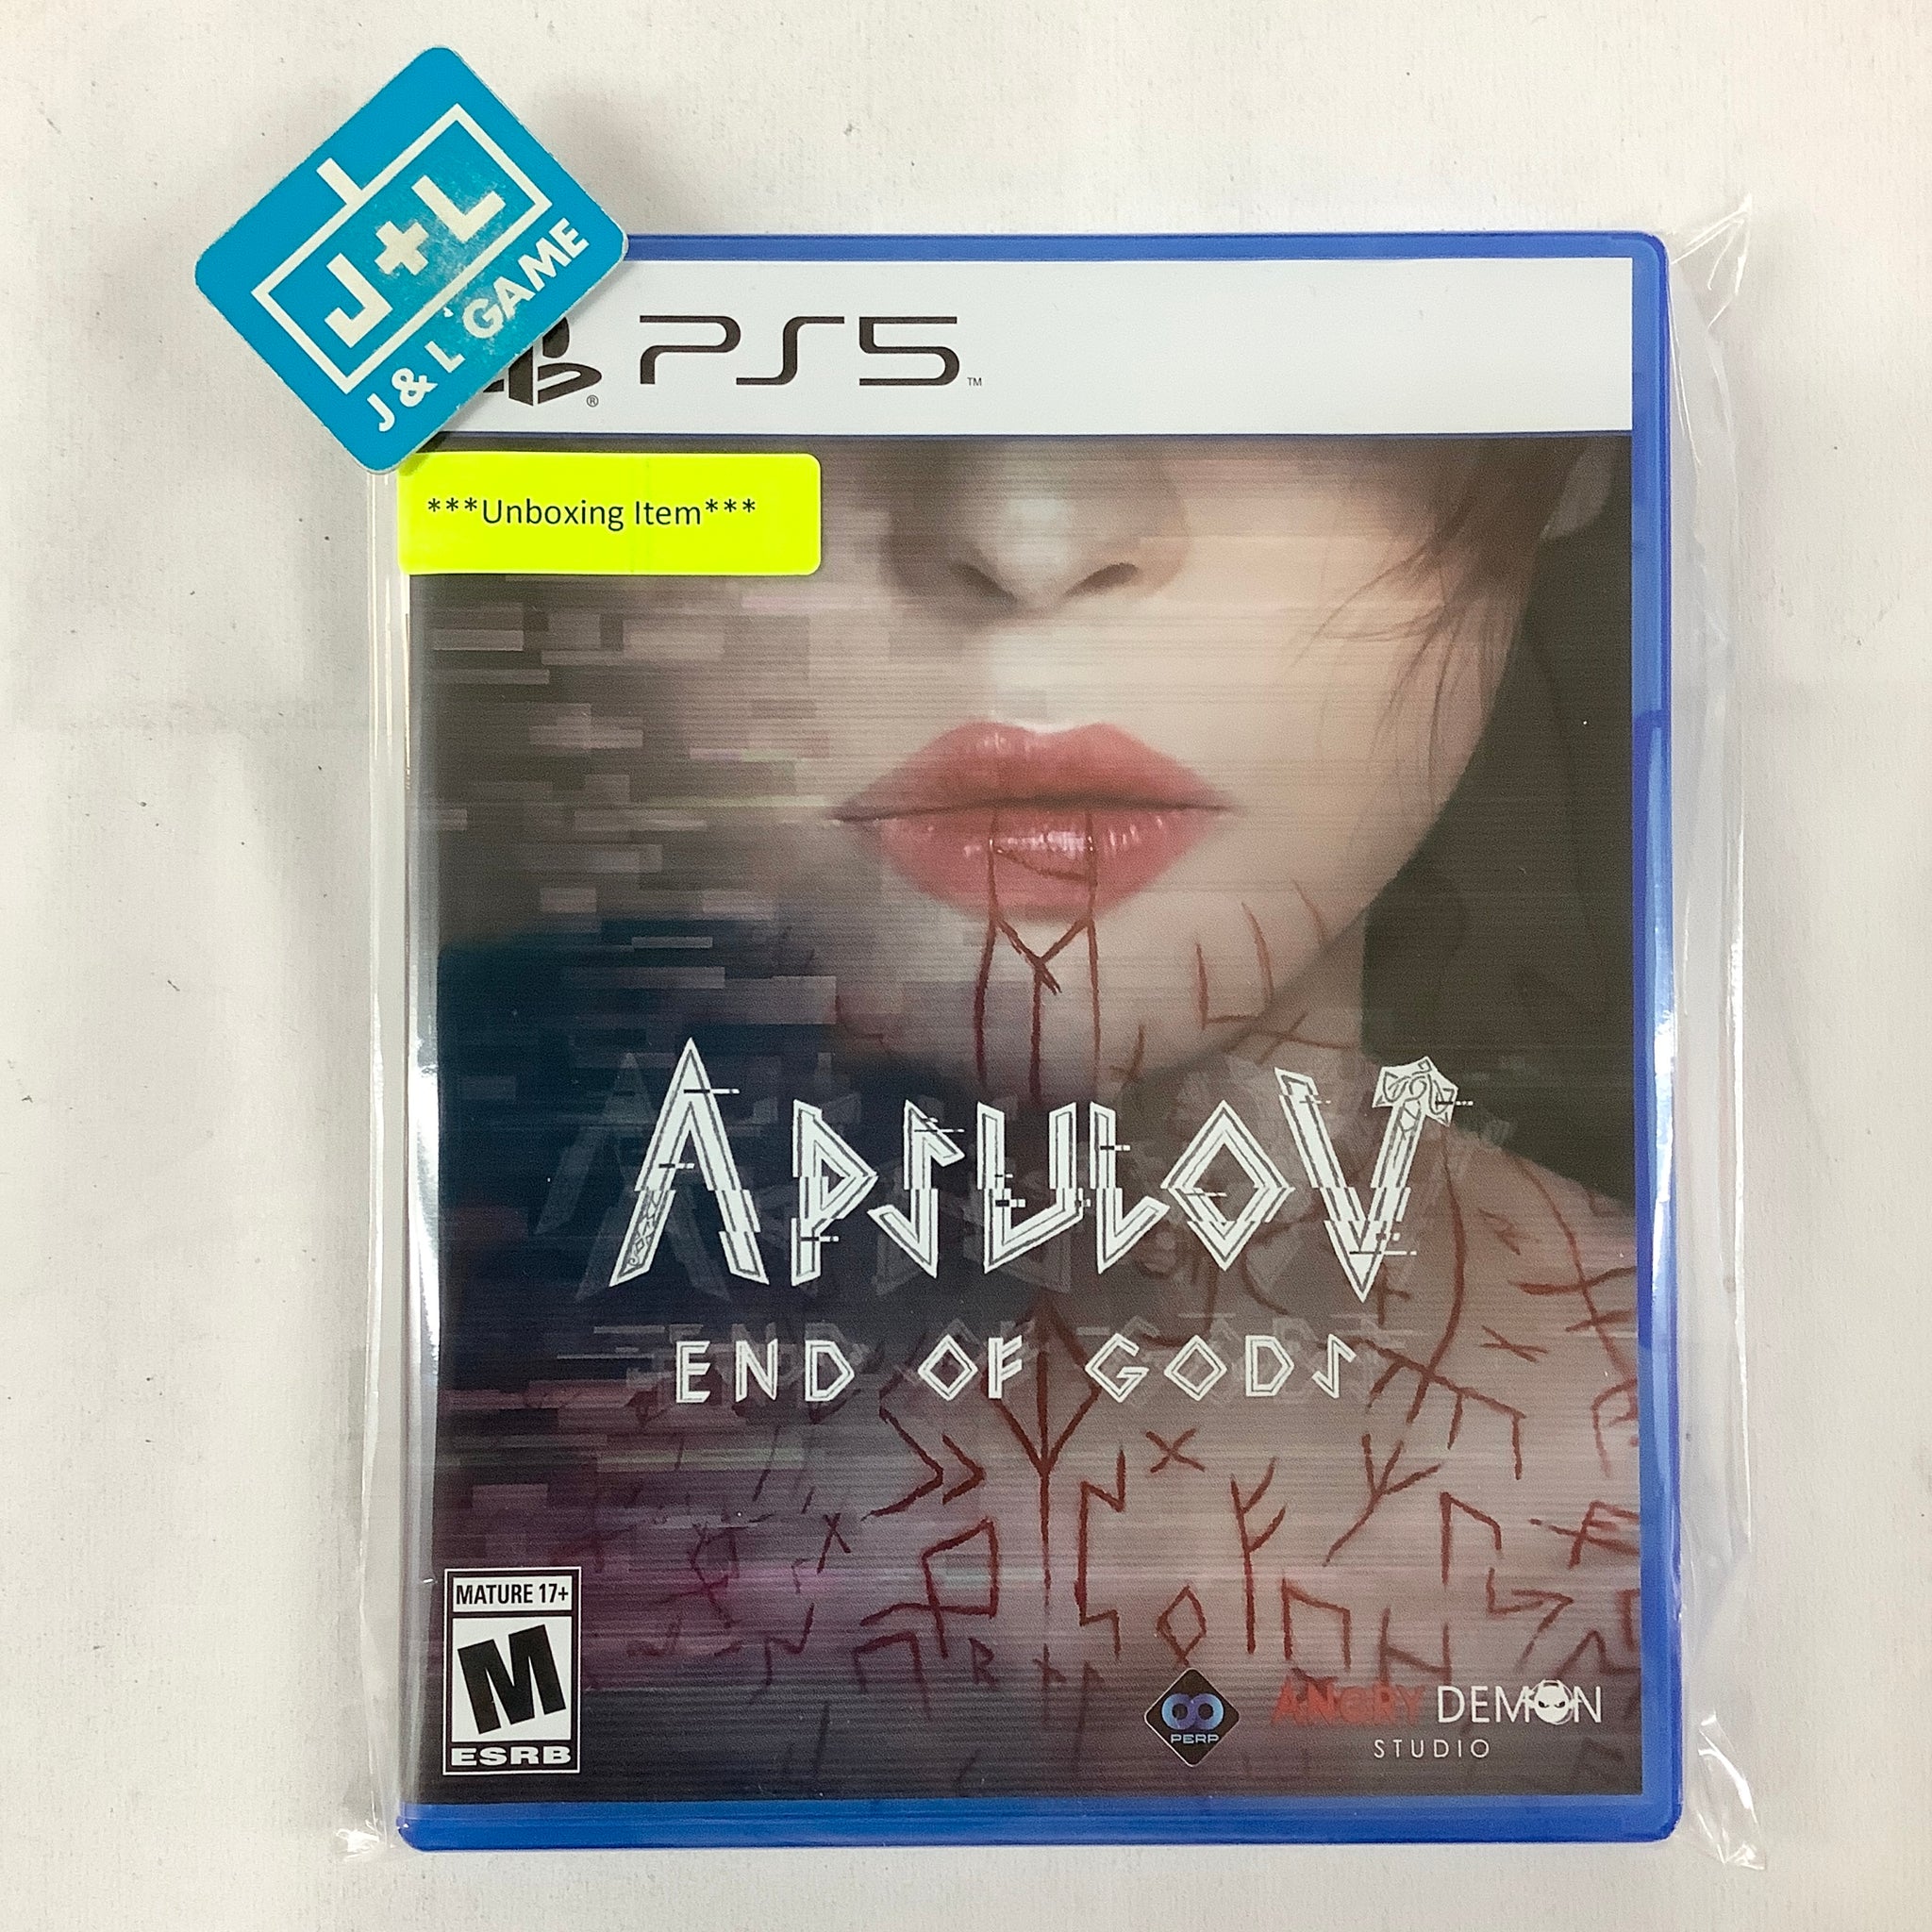 Apsulov: End of Gods - (PS5) PlayStation 5 [UNBOXING] Video Games Perpetual   